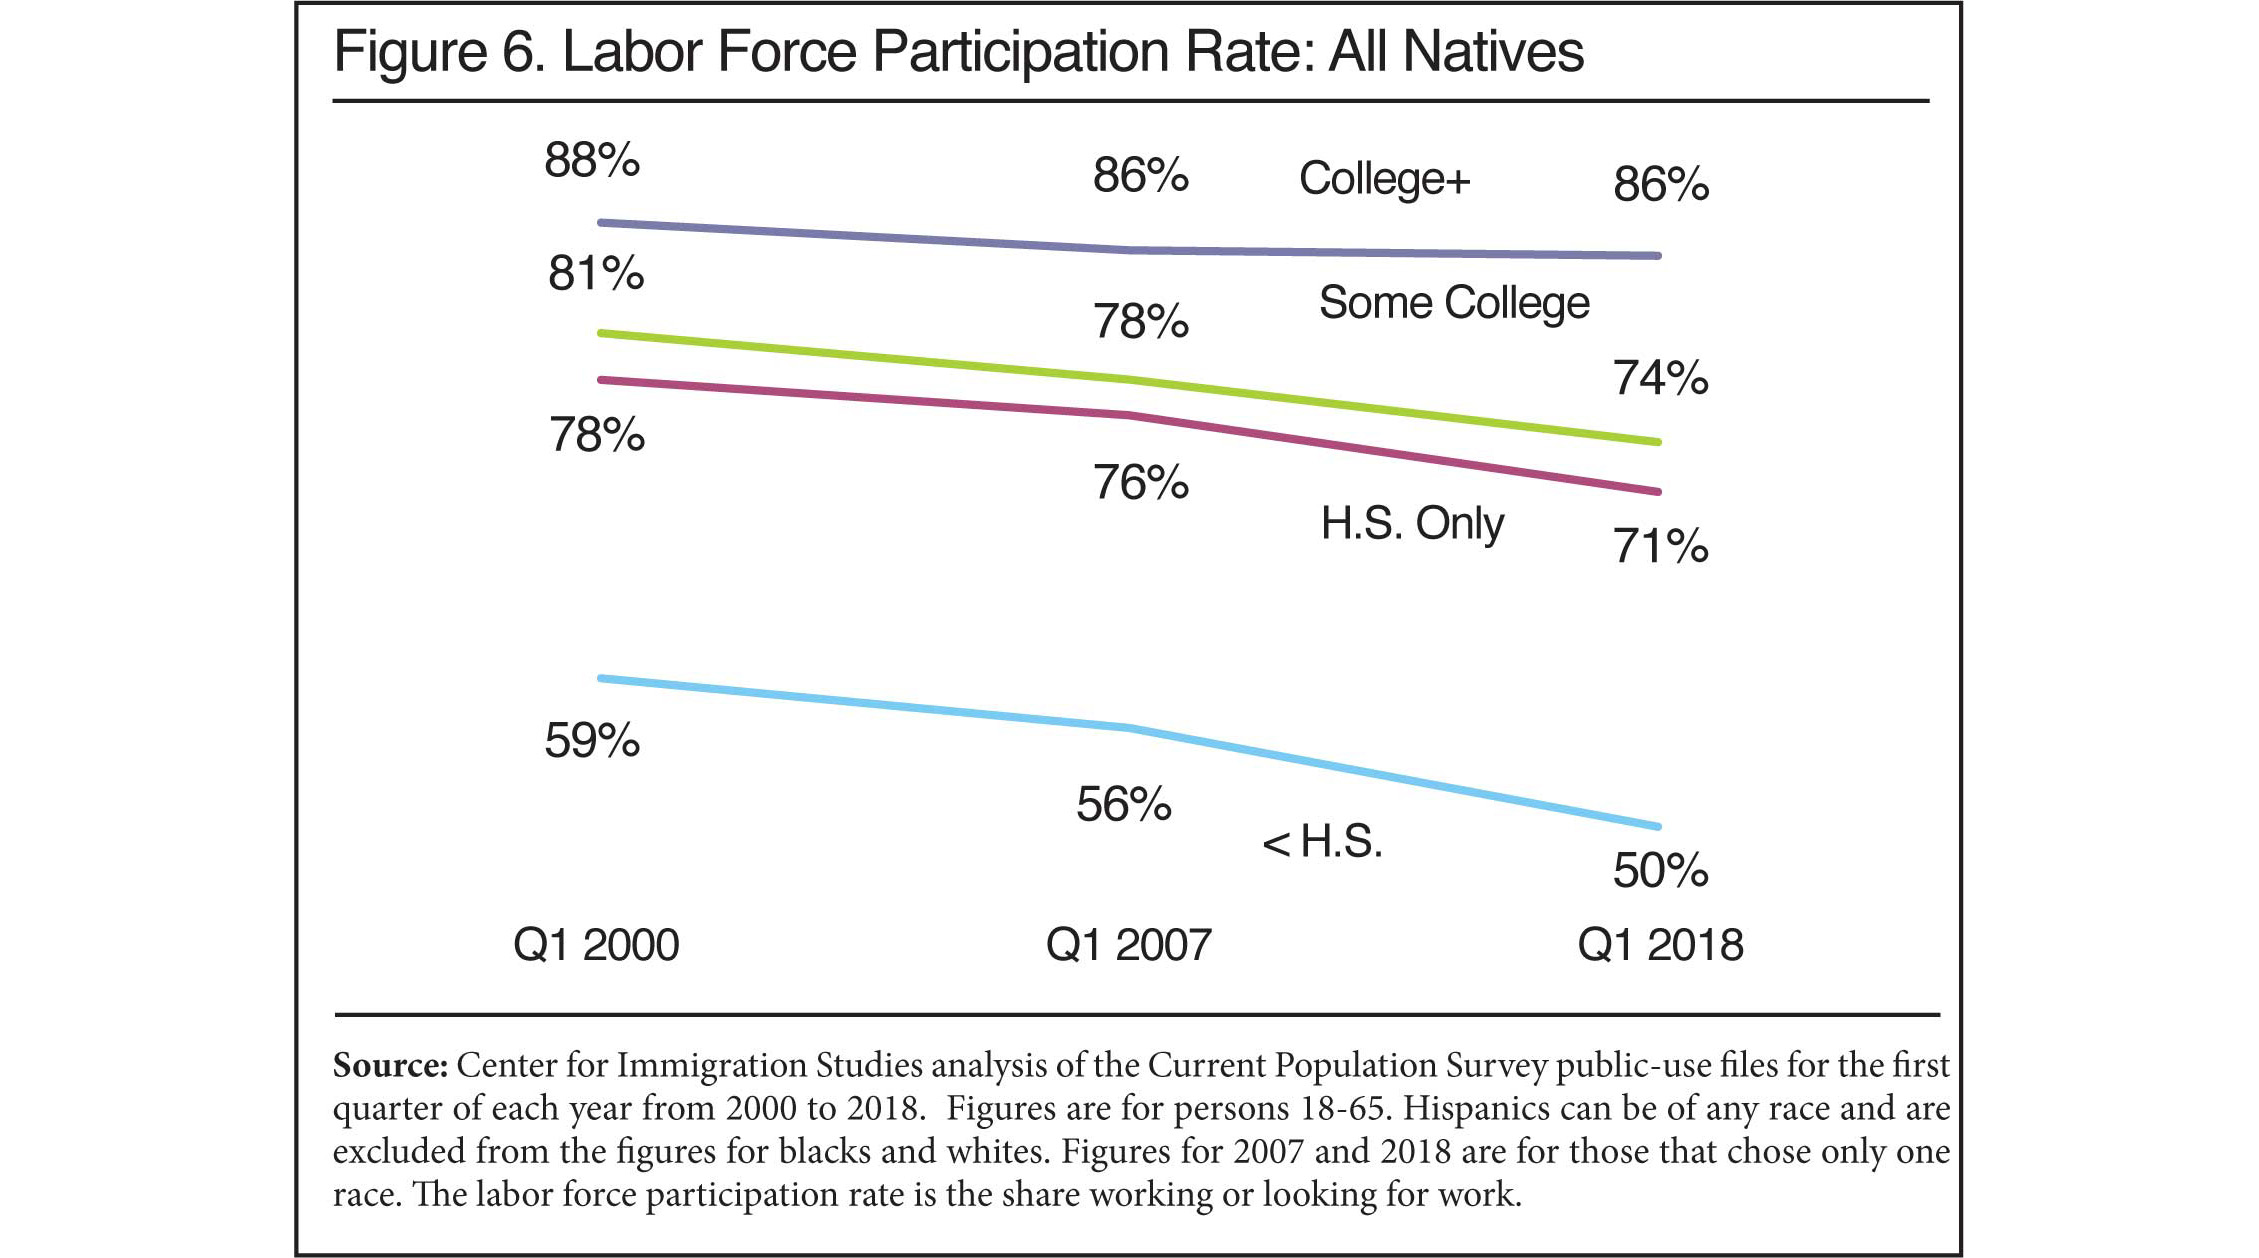 Graph: Labor Force Participation Rate for all Natives, 2000 to 2018